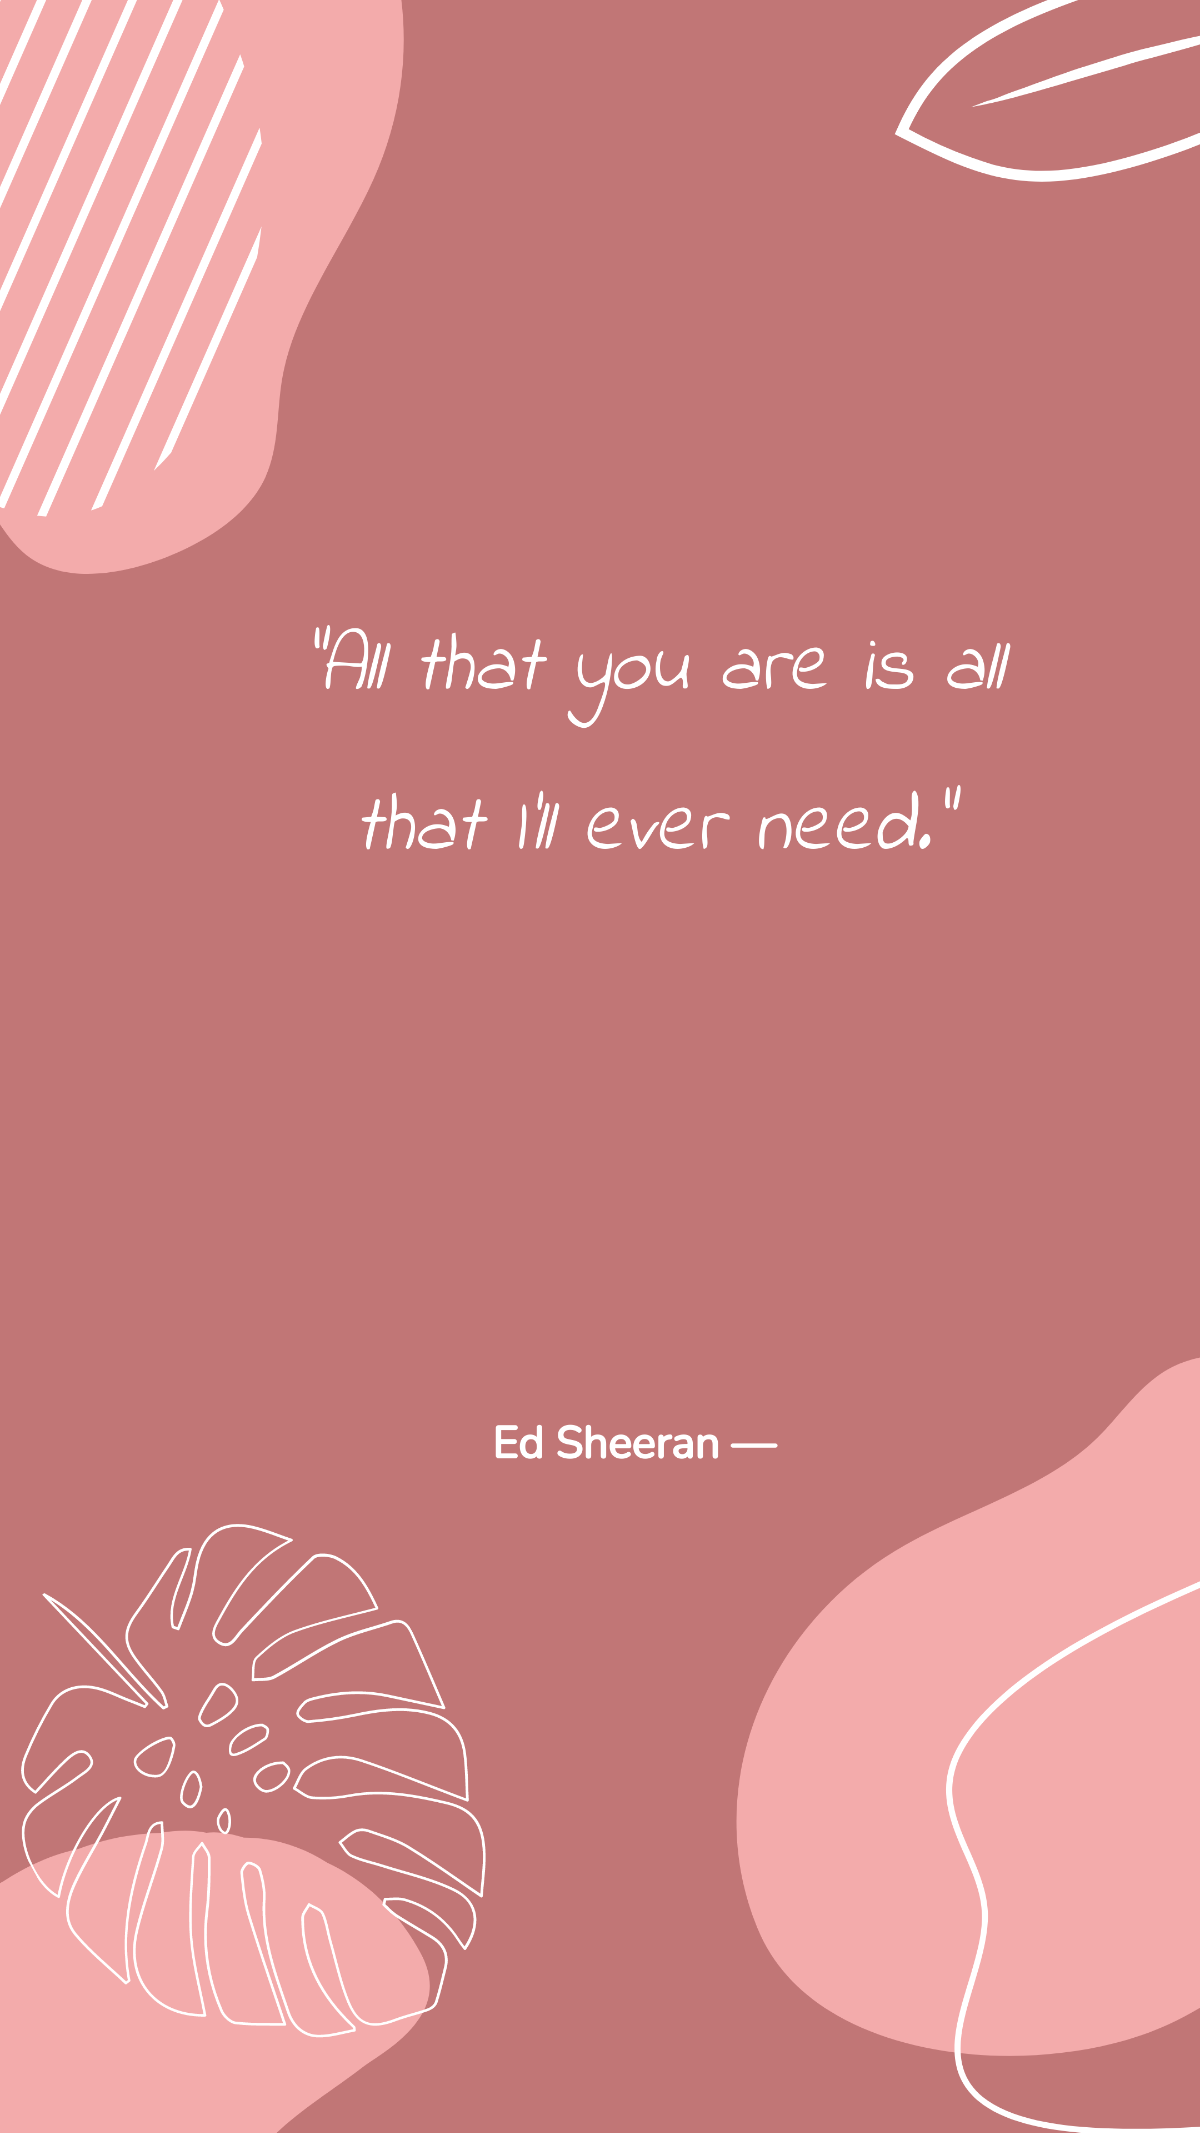 Ed Sheeran — ”All that you are is all that I’ll ever need.” Template